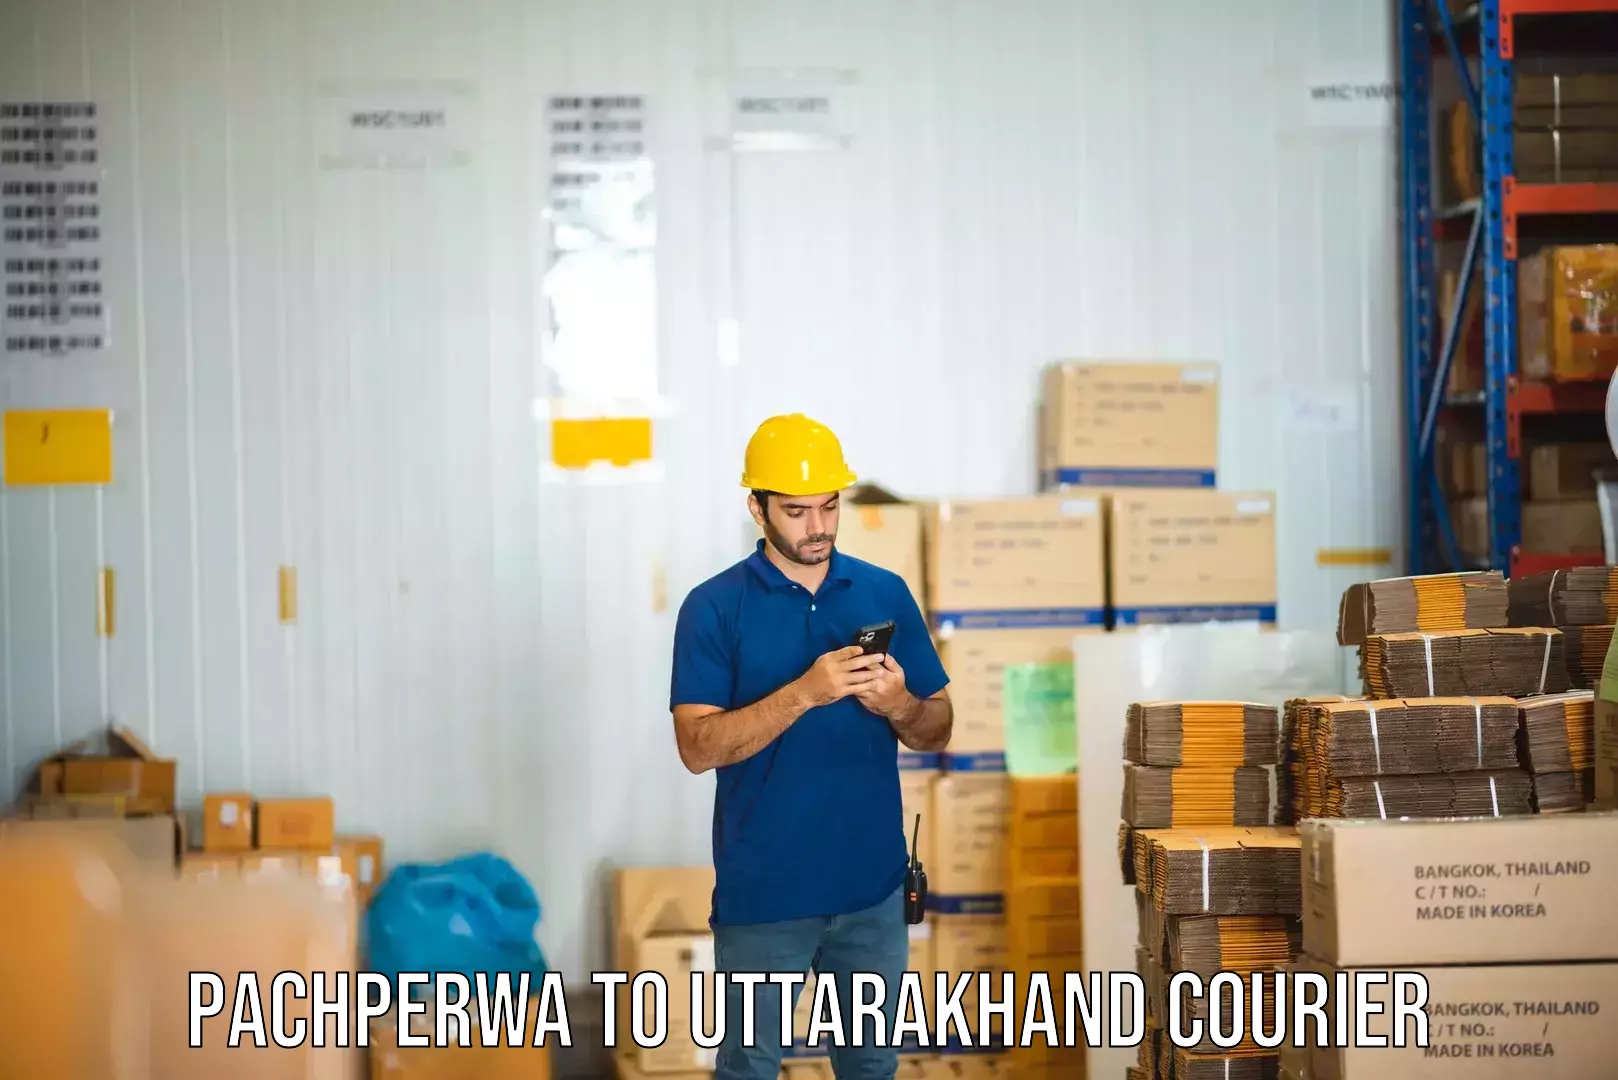 Flexible delivery schedules Pachperwa to Roorkee